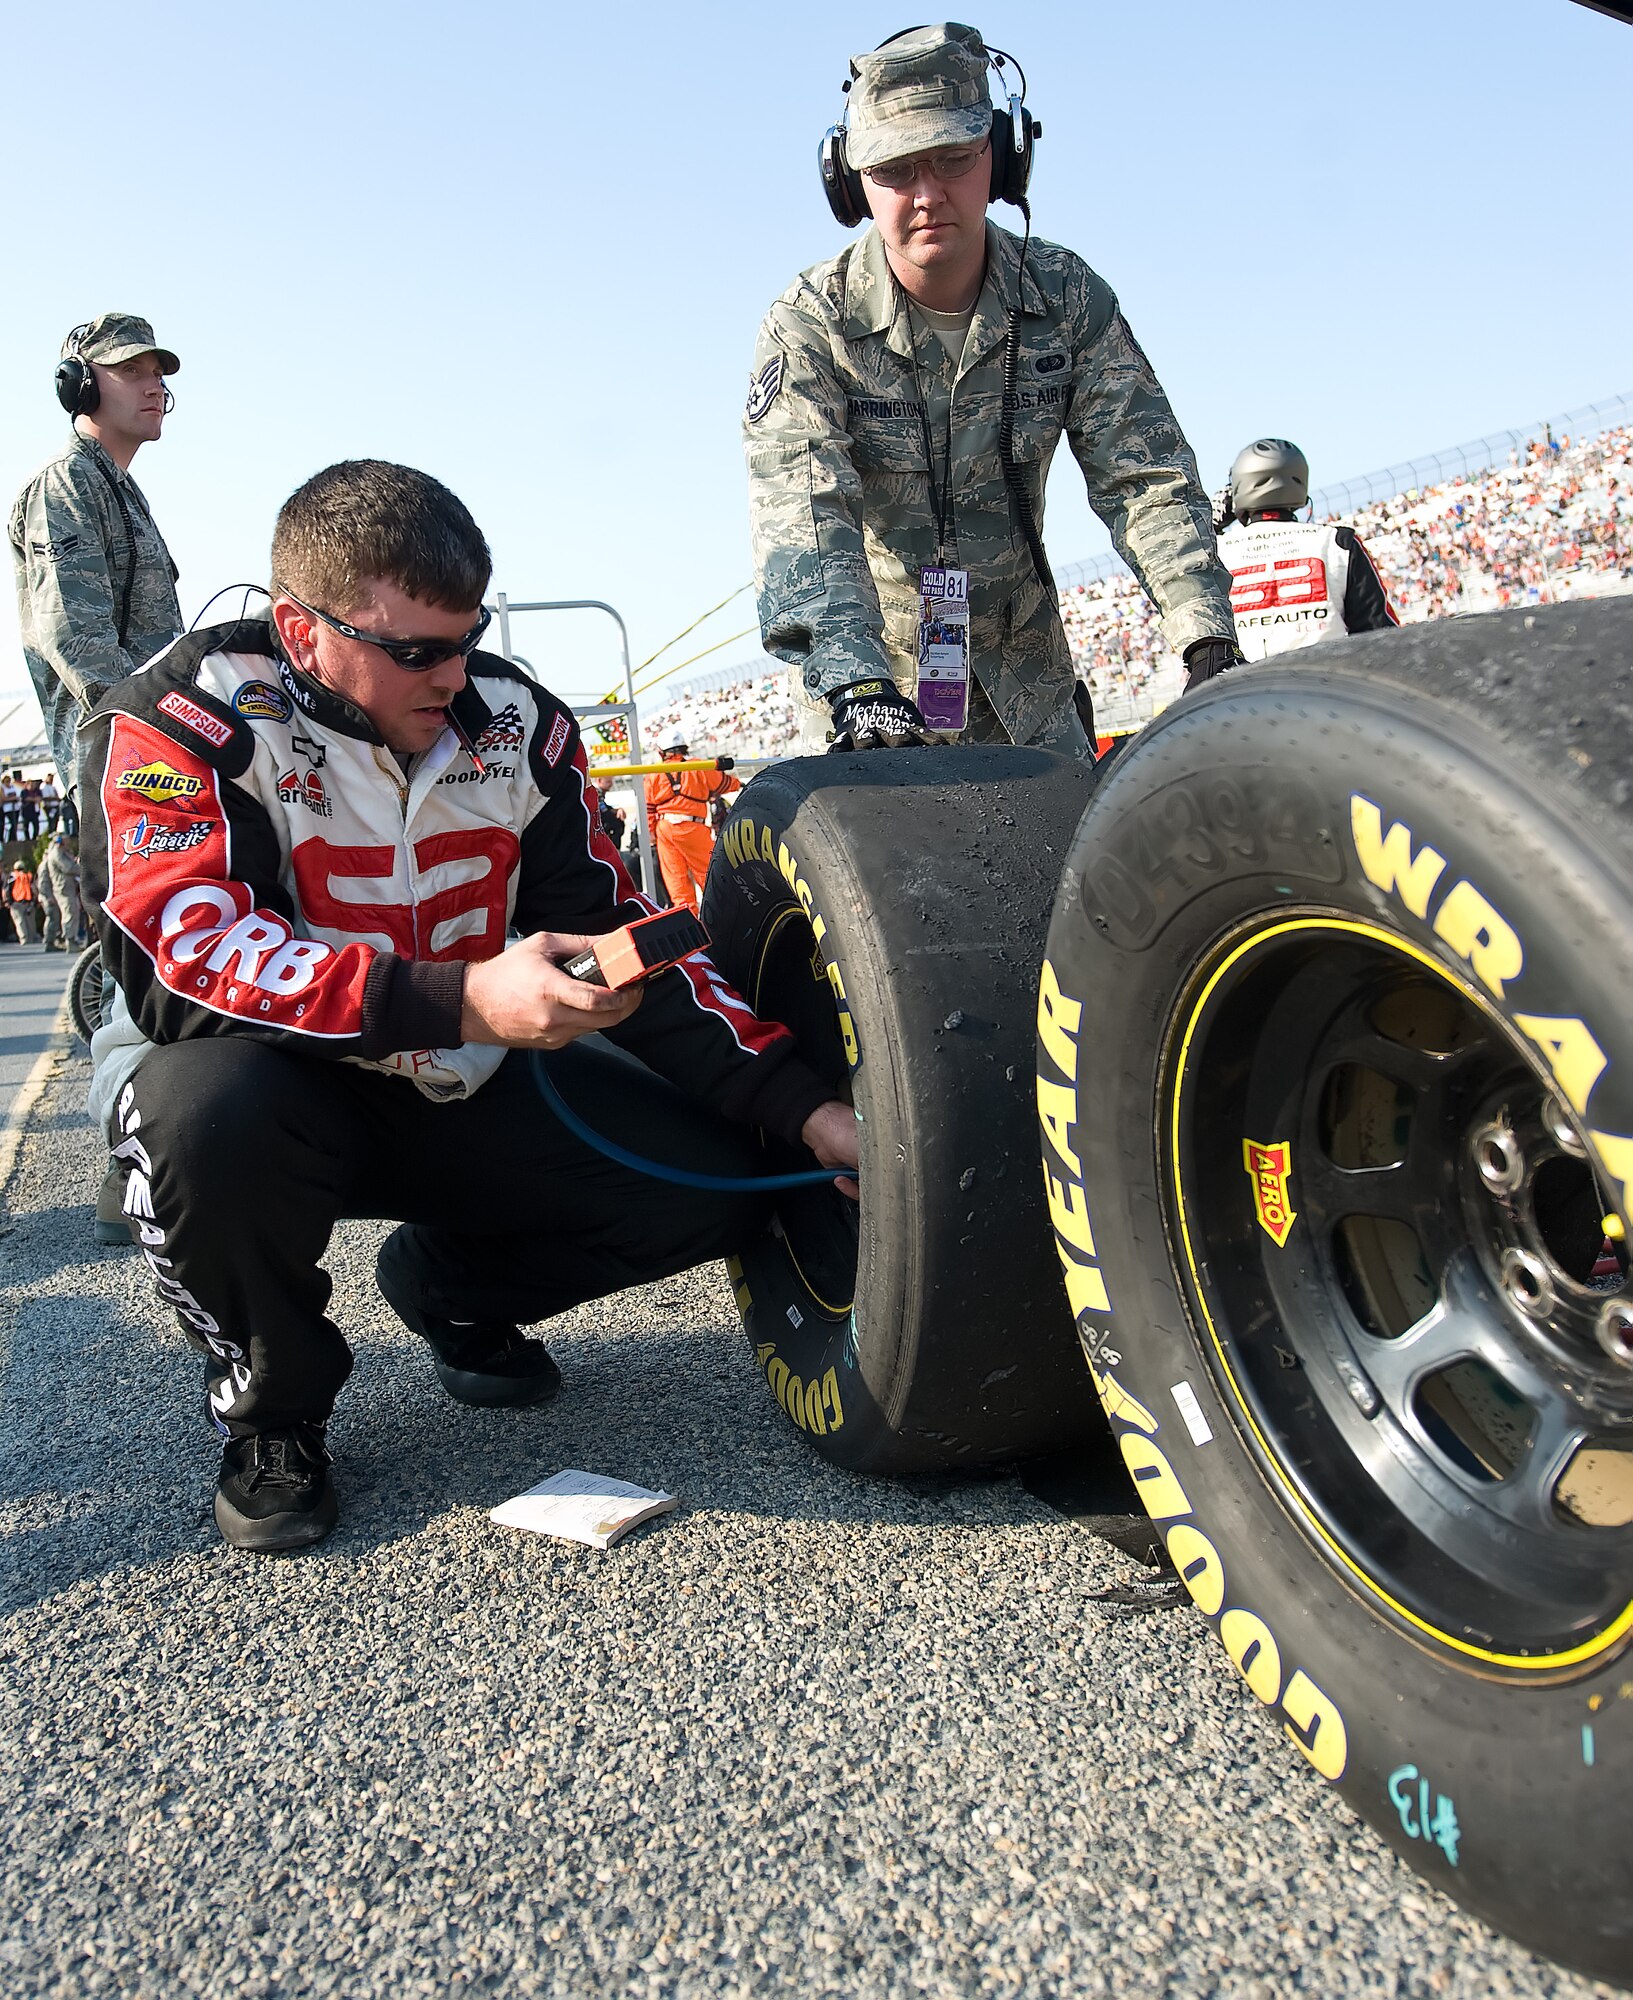 Kevin Gravitte, Red Horse Racing No. 13 tire carrier and tire specialist, and Staff Sgt. William Harrington, 436th Force Support Squadron food service supervisor, work together to check the pressure of the No. 13 truck’s tires May 13, 2011 at Dover International Speedway, Del.  These tires were taken off at the first pit-stop of the Lucas Oil 200. (U.S. Air Force photo by Airman 1st Class Jacob Morgan)